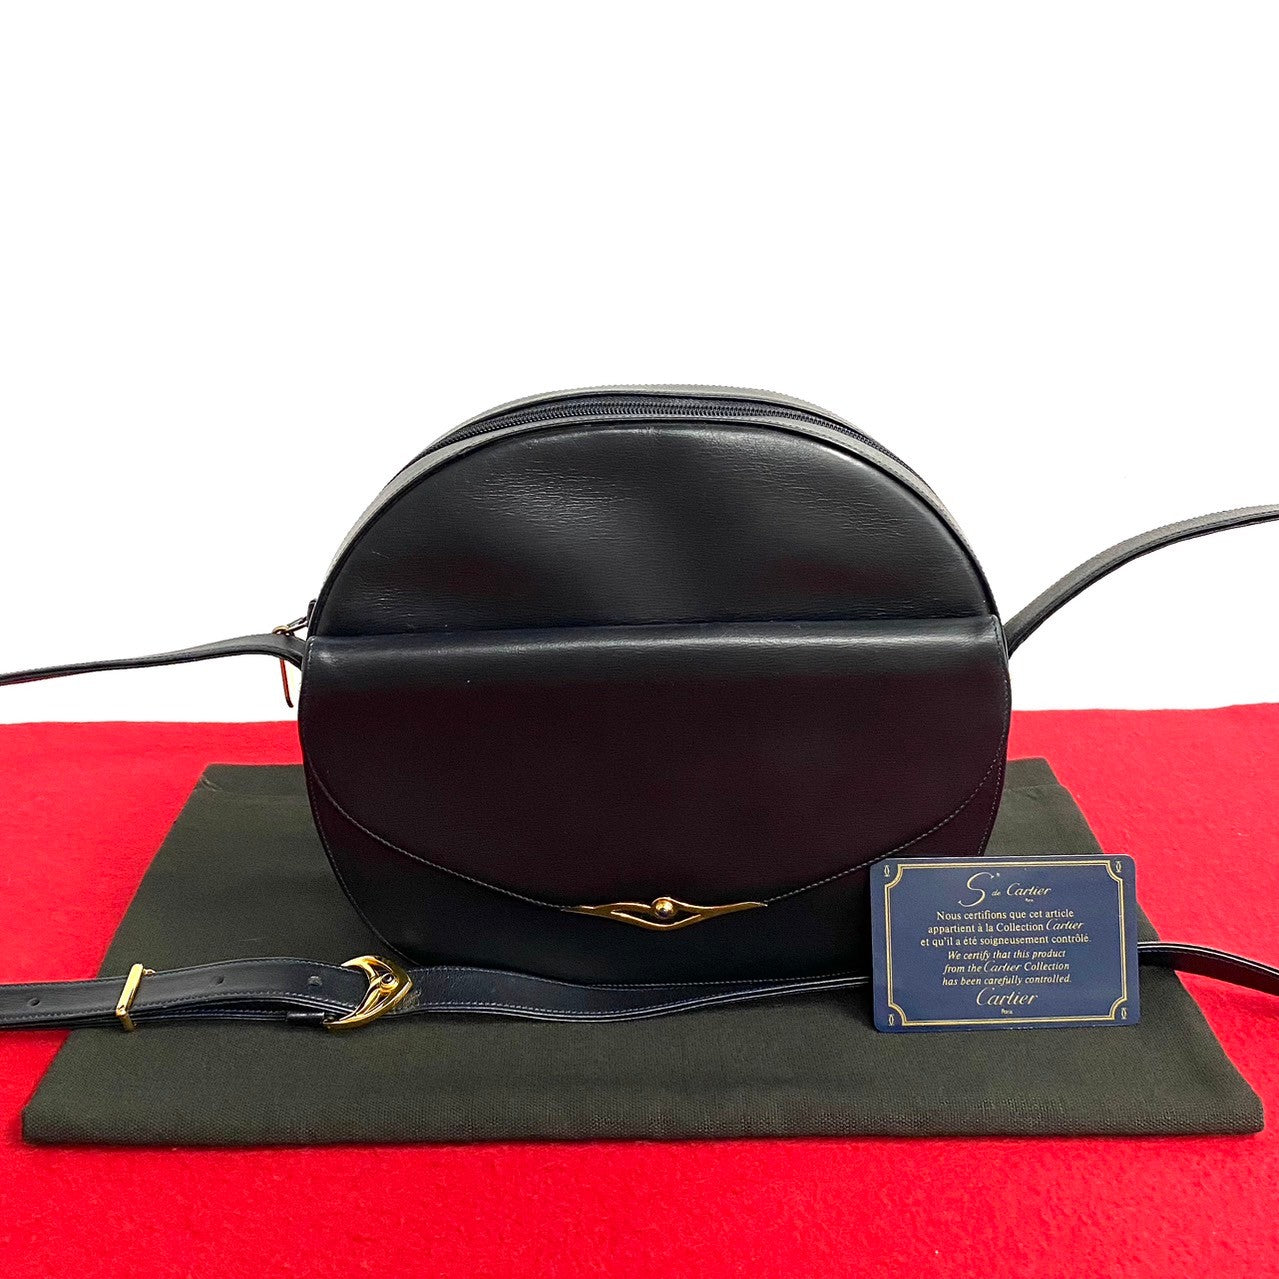 Cartier Leather Sapphire Crossbody Bag Leather Crossbody Bag in Good condition